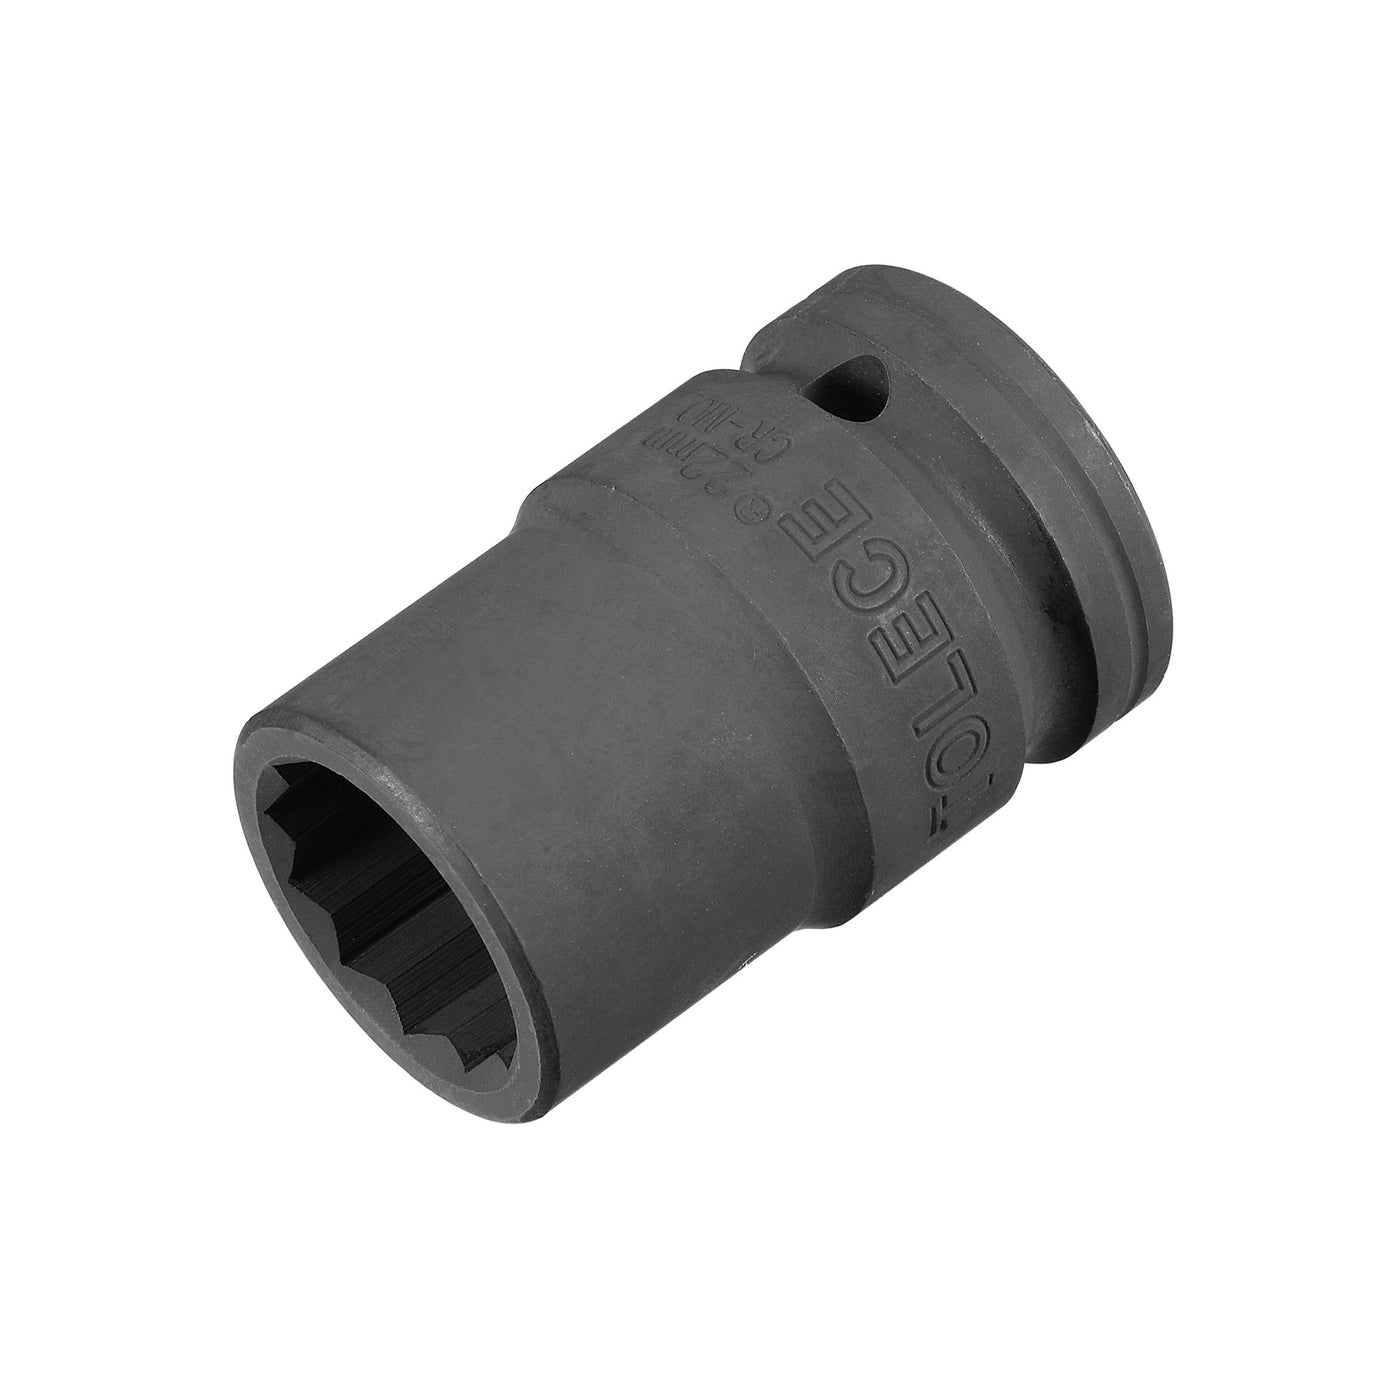 uxcell Uxcell 3/4" Drive 22mm 12-Point Impact Socket, CR-MO Steel 56mm Length, Standard Metric